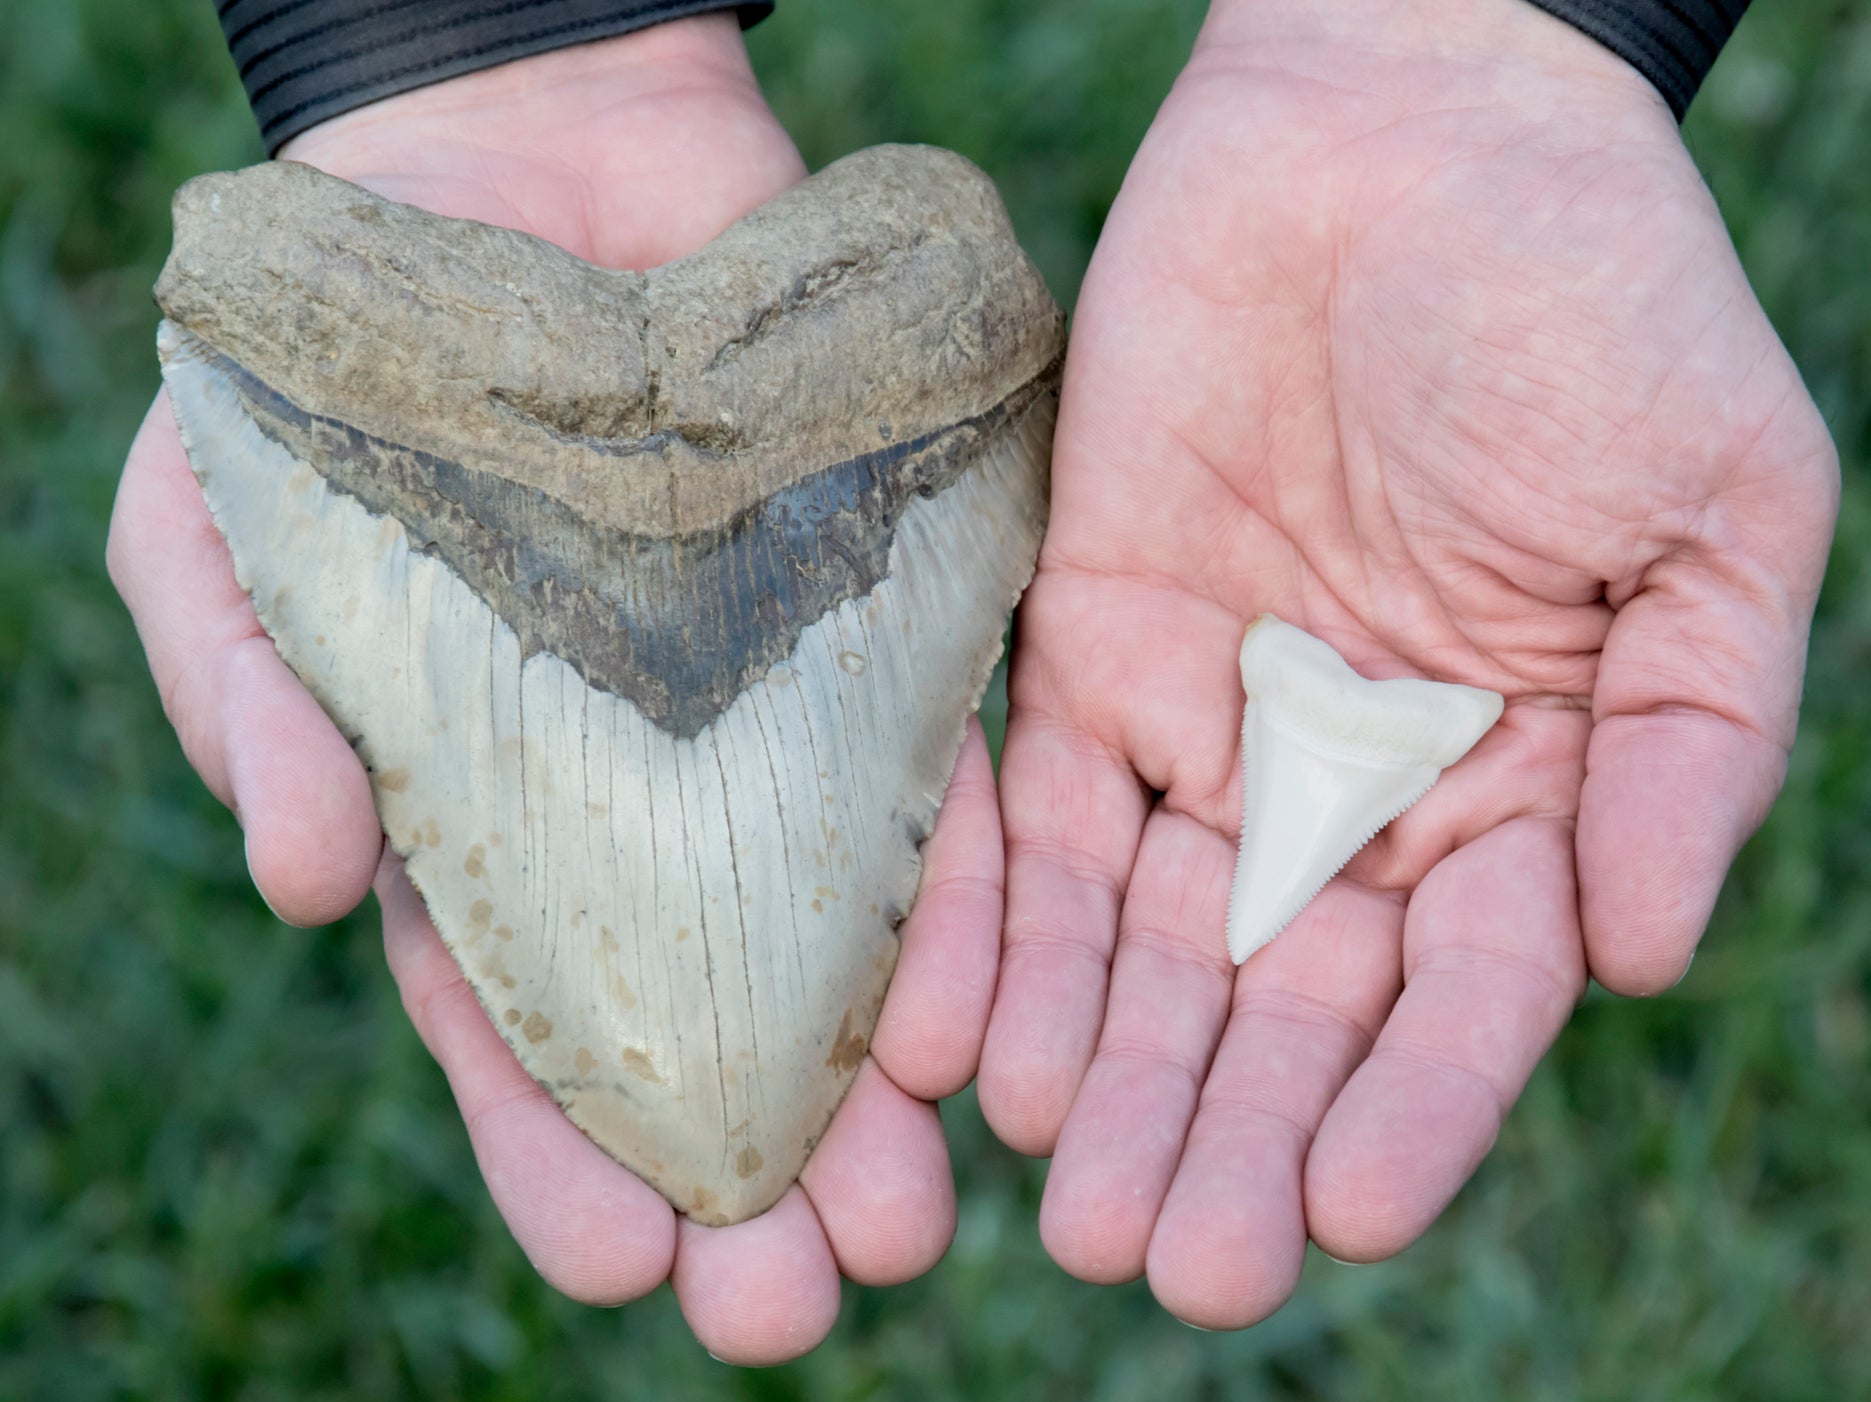 Huge size of extinct megalodon shark was ‘off the charts’, new study